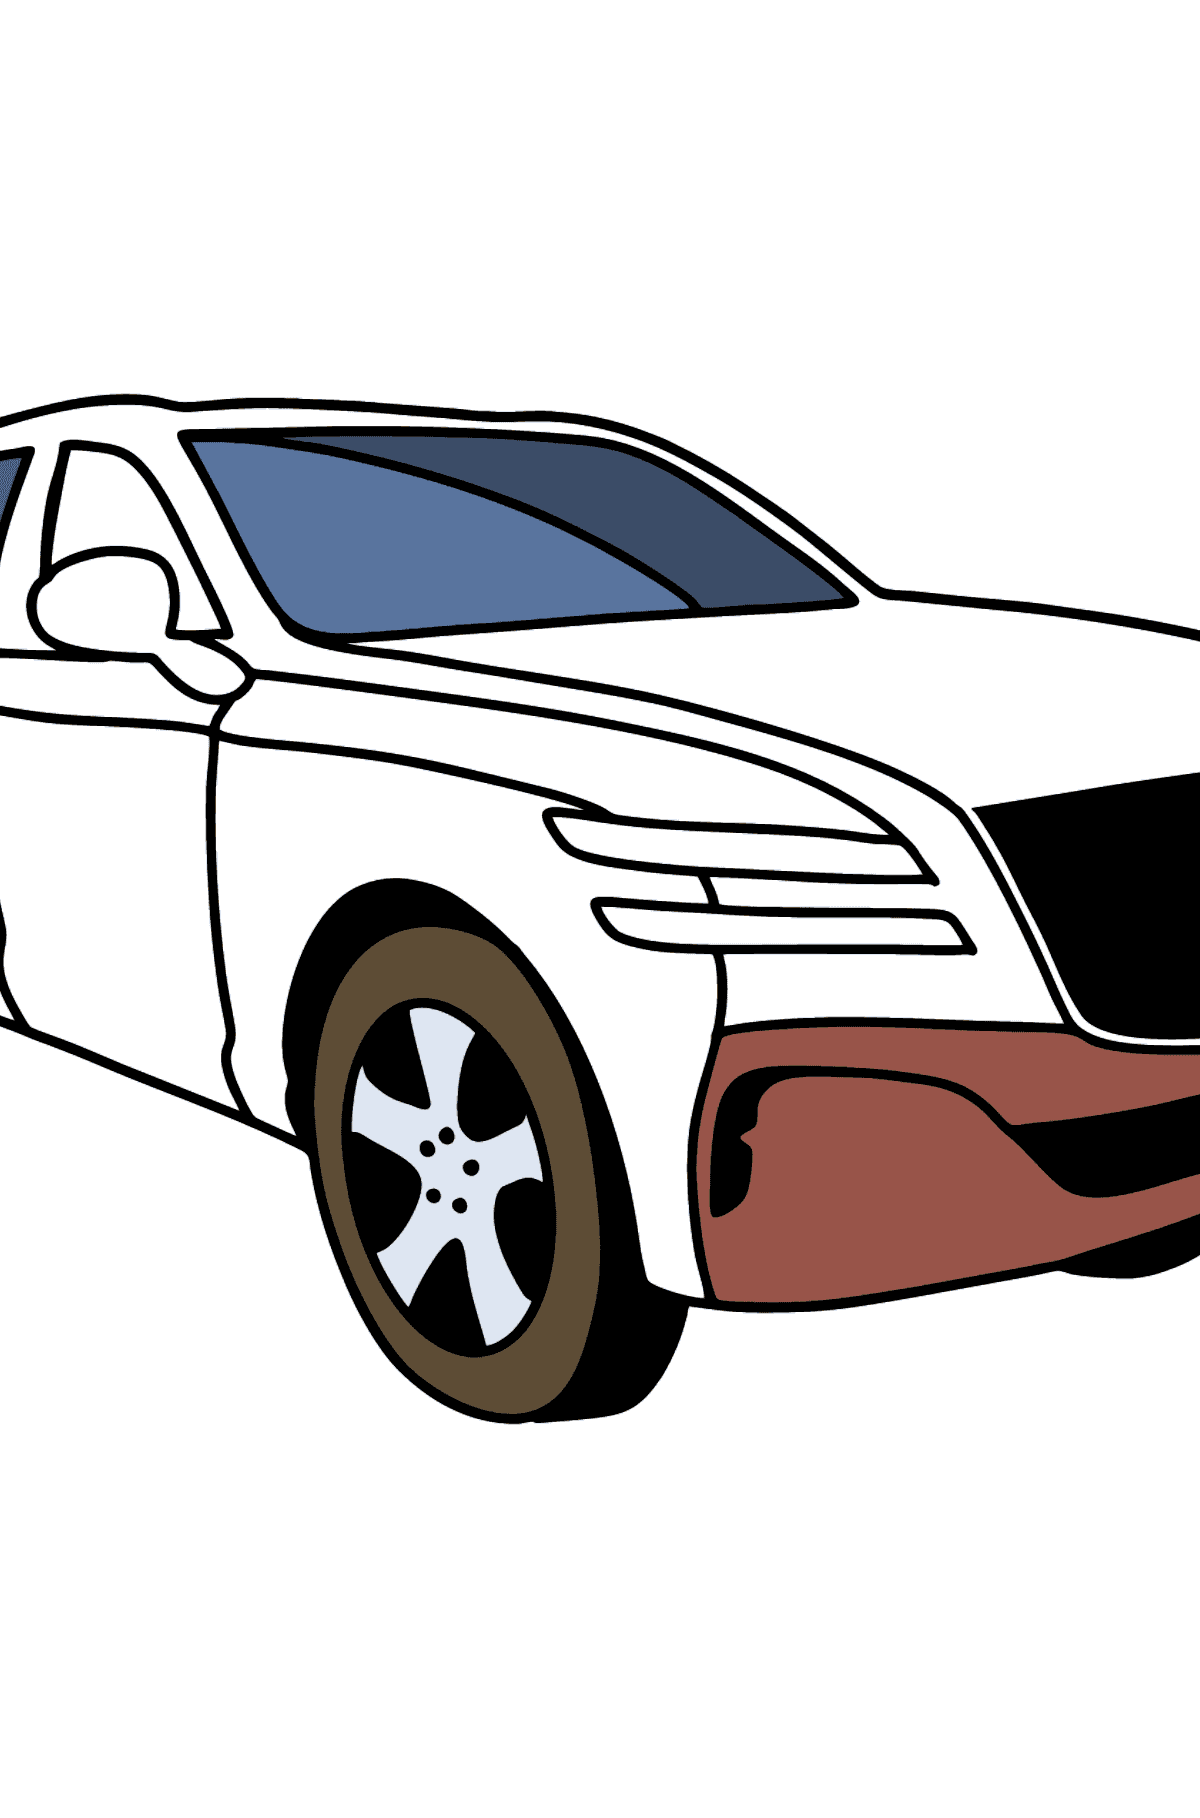 Genesis car coloring page - Coloring Pages for Kids